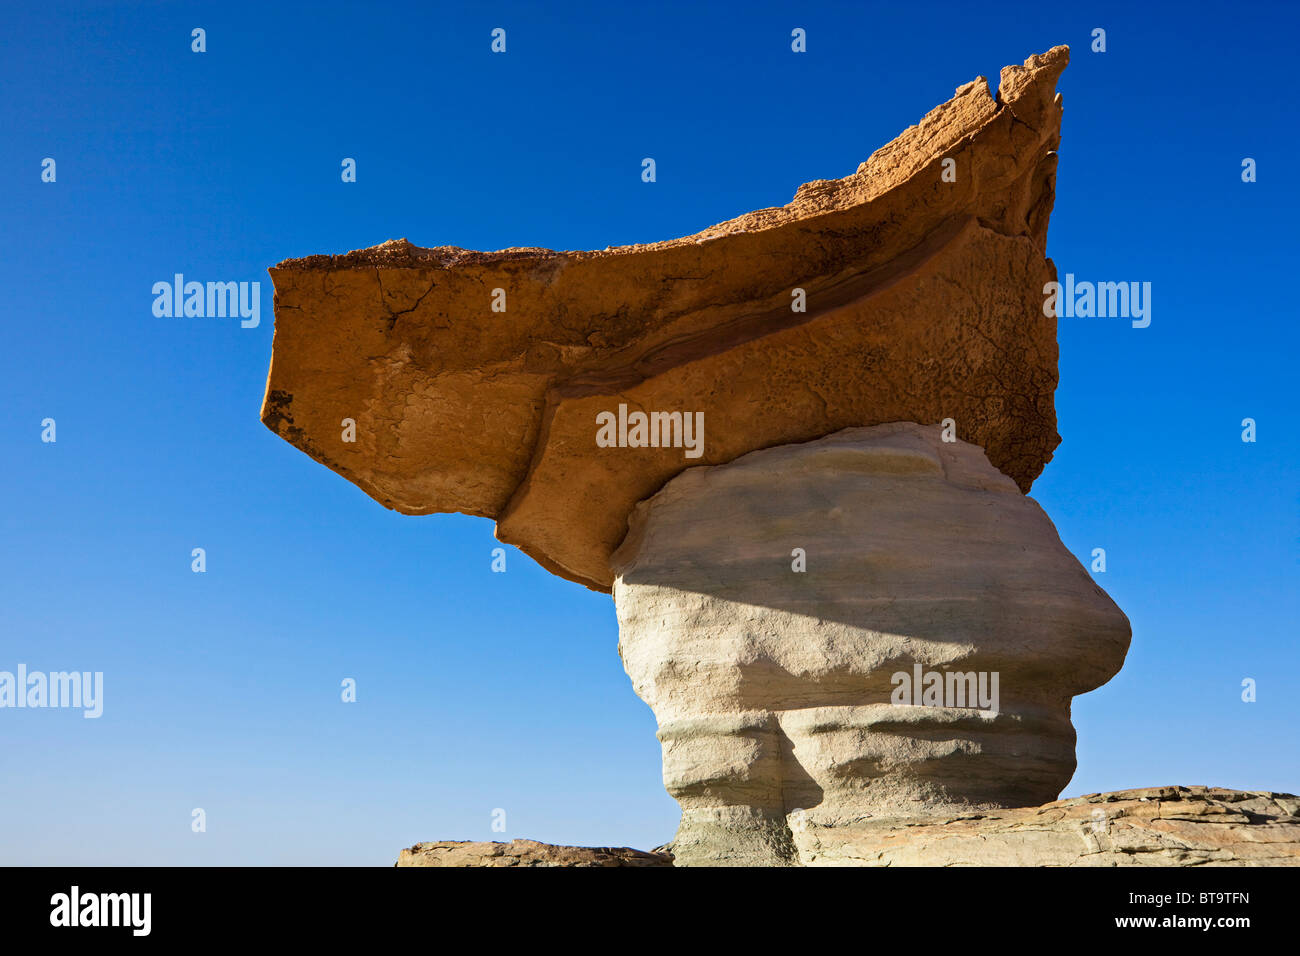 Rock formation, Hoodoo at Stud Horse Point, Glen Canyon National Recreation Area, Utah, America, United States Stock Photo